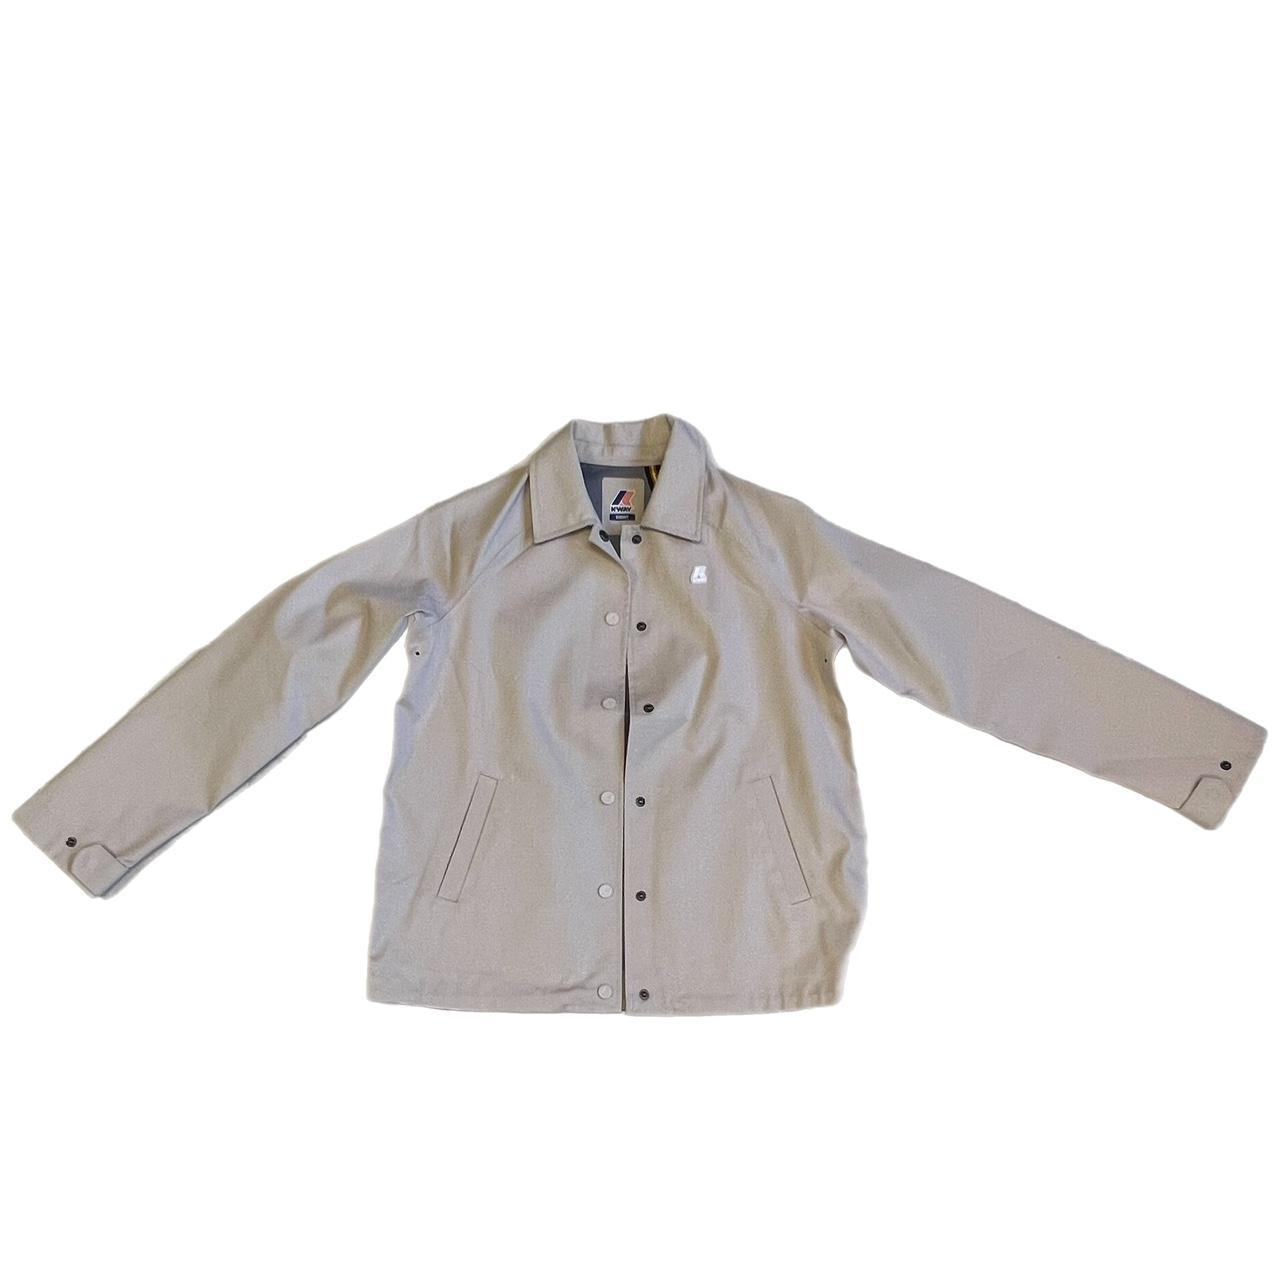 Product Image 1 - K-way  jacket perfect for